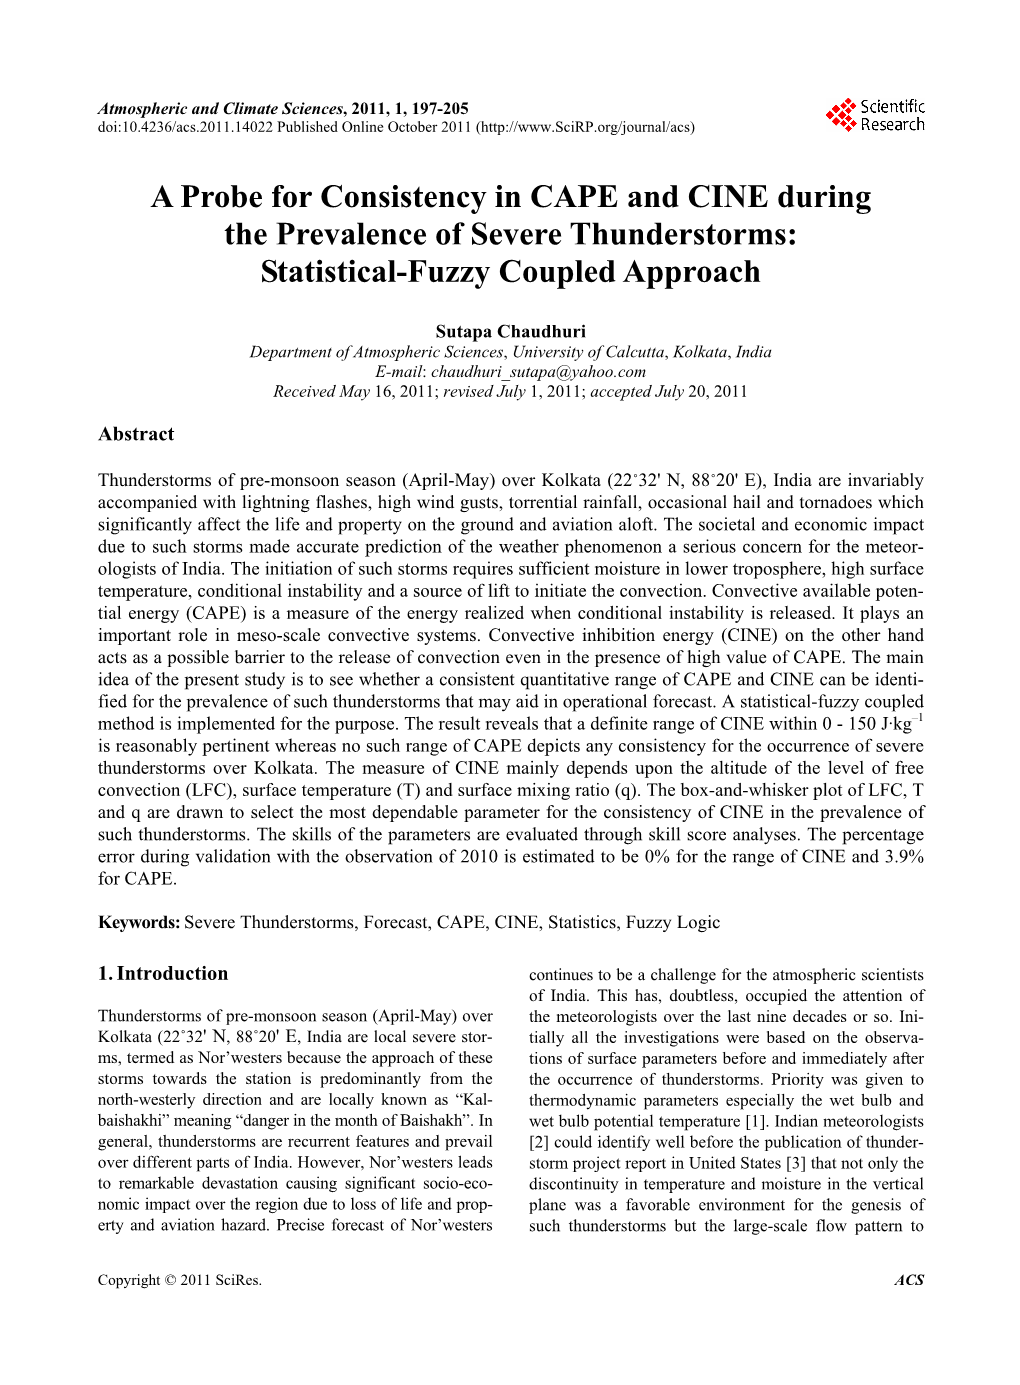 A Probe for Consistency in CAPE and CINE During the Prevalence of Severe Thunderstorms: Statistical-Fuzzy Coupled Approach